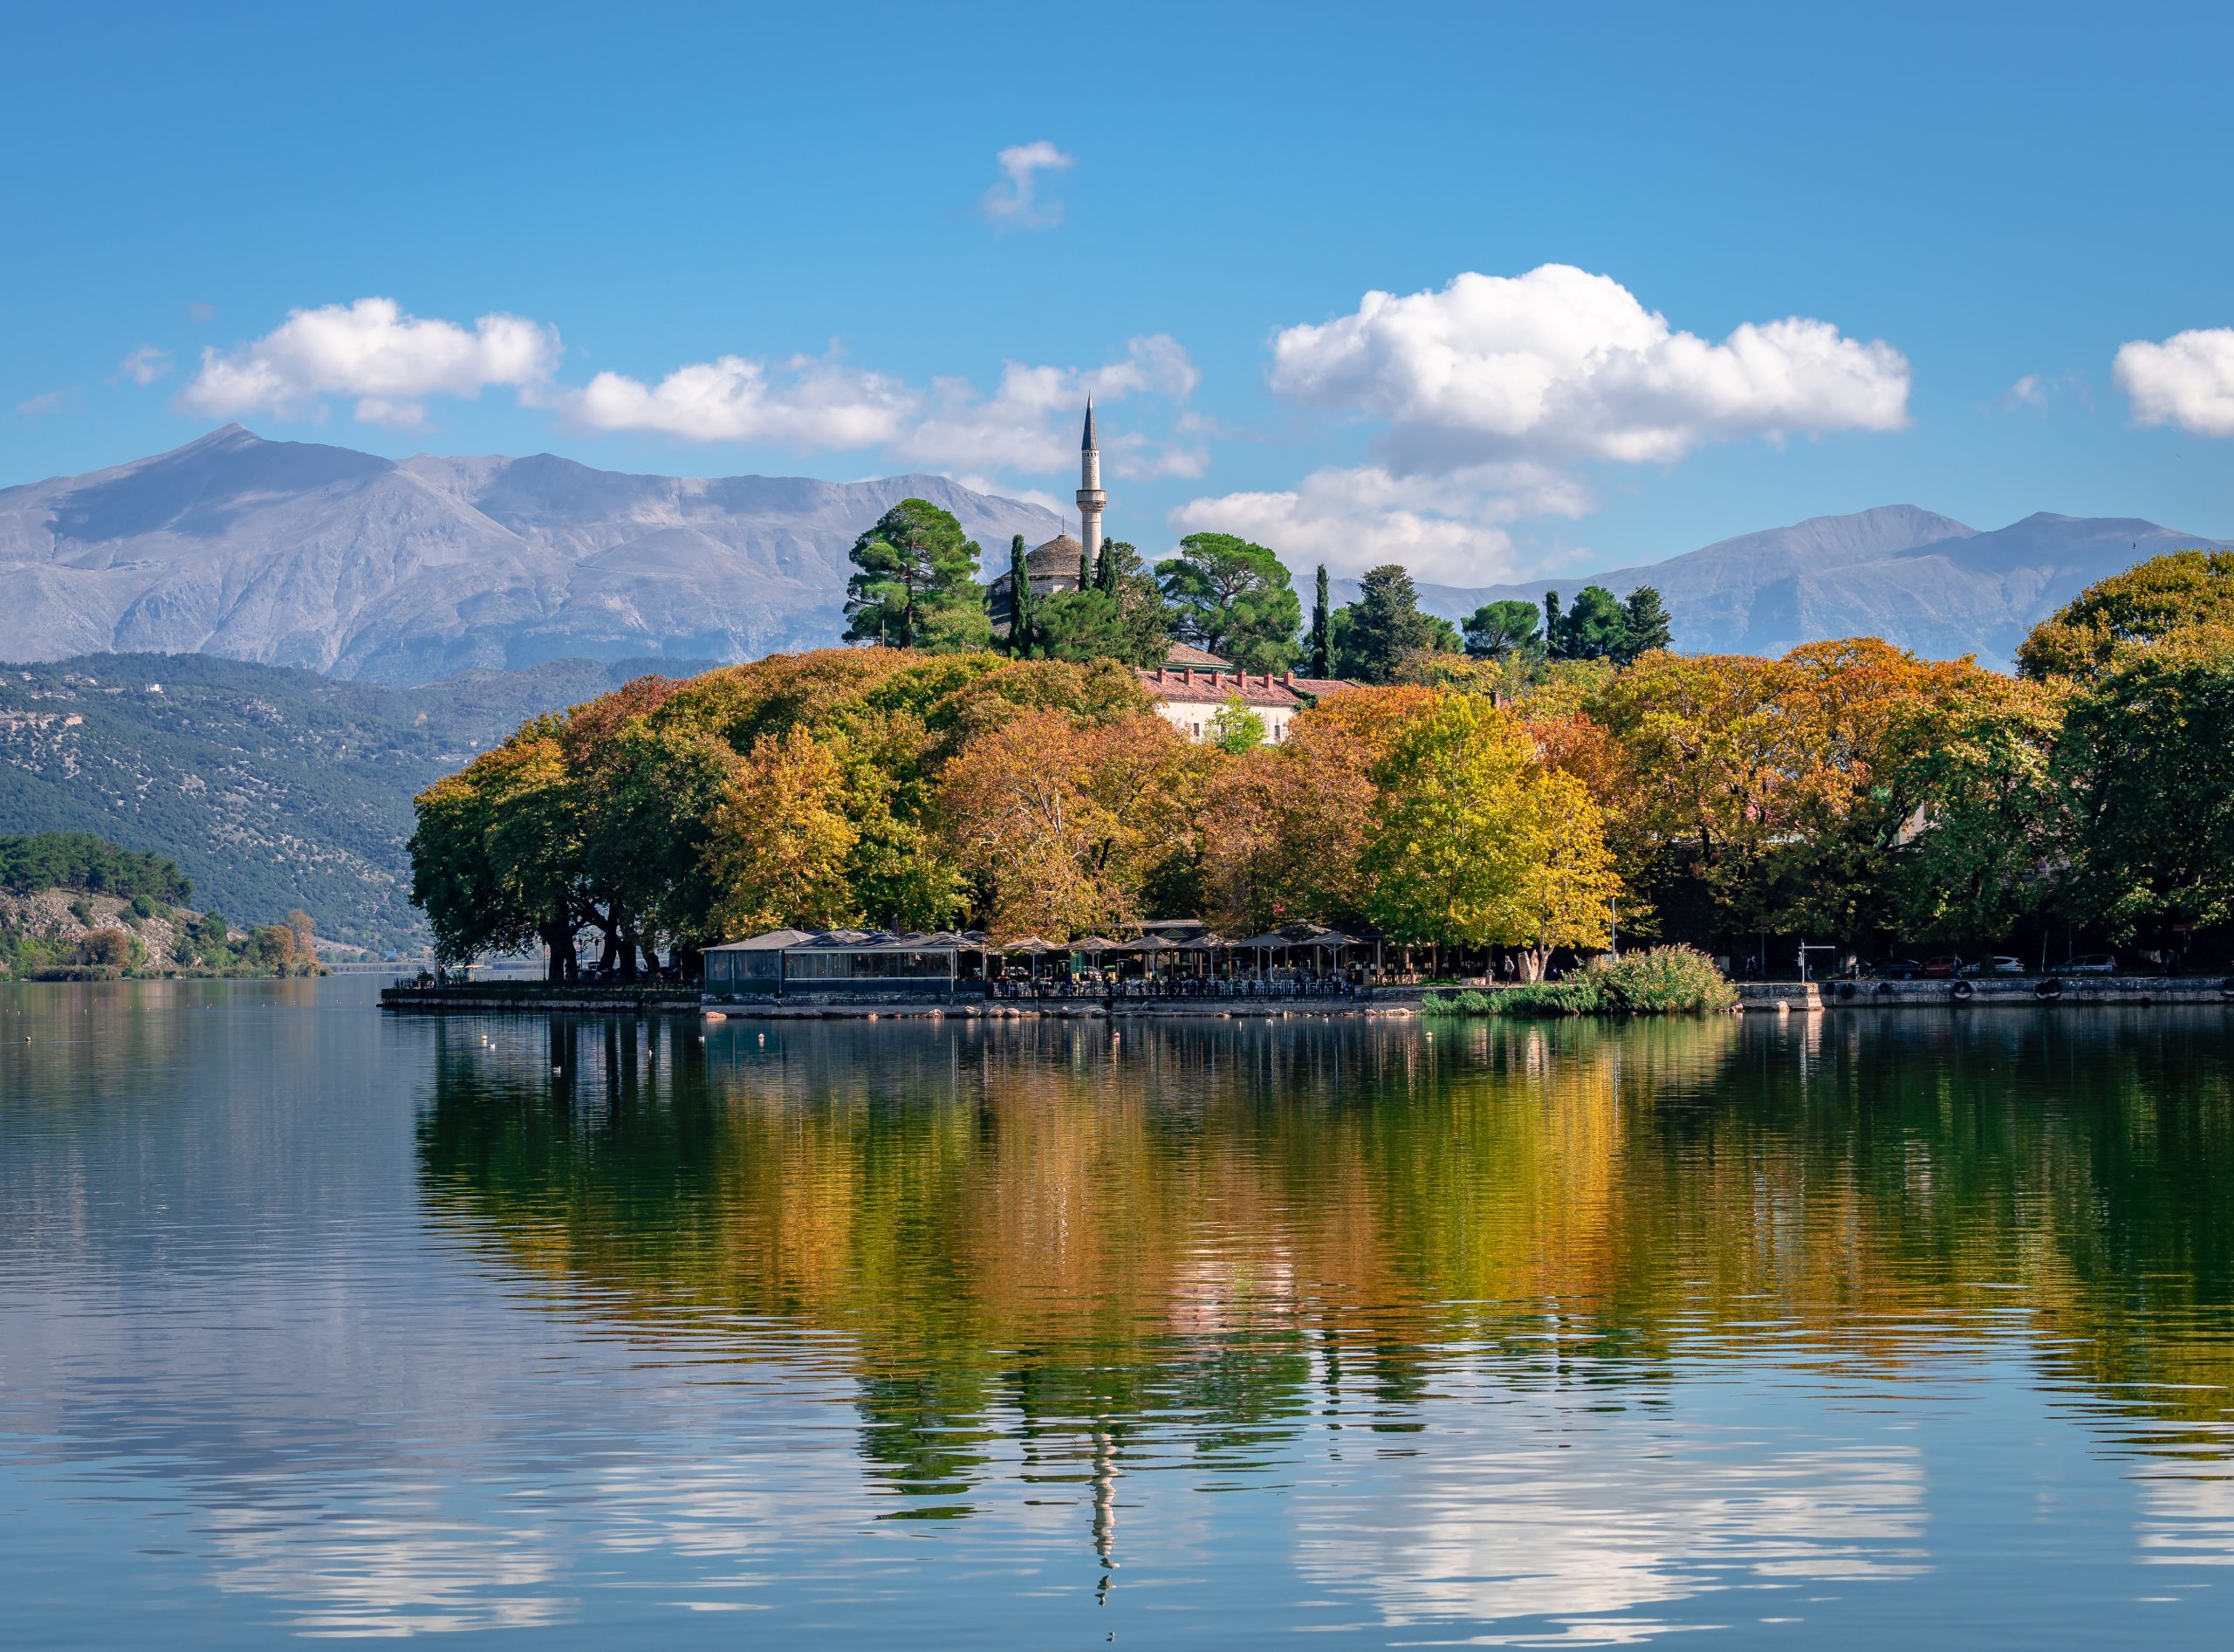 The Old Castle and the Aslan Pasha Mosque in Ioannina, Greece. Reflections on lake Pamvotis.